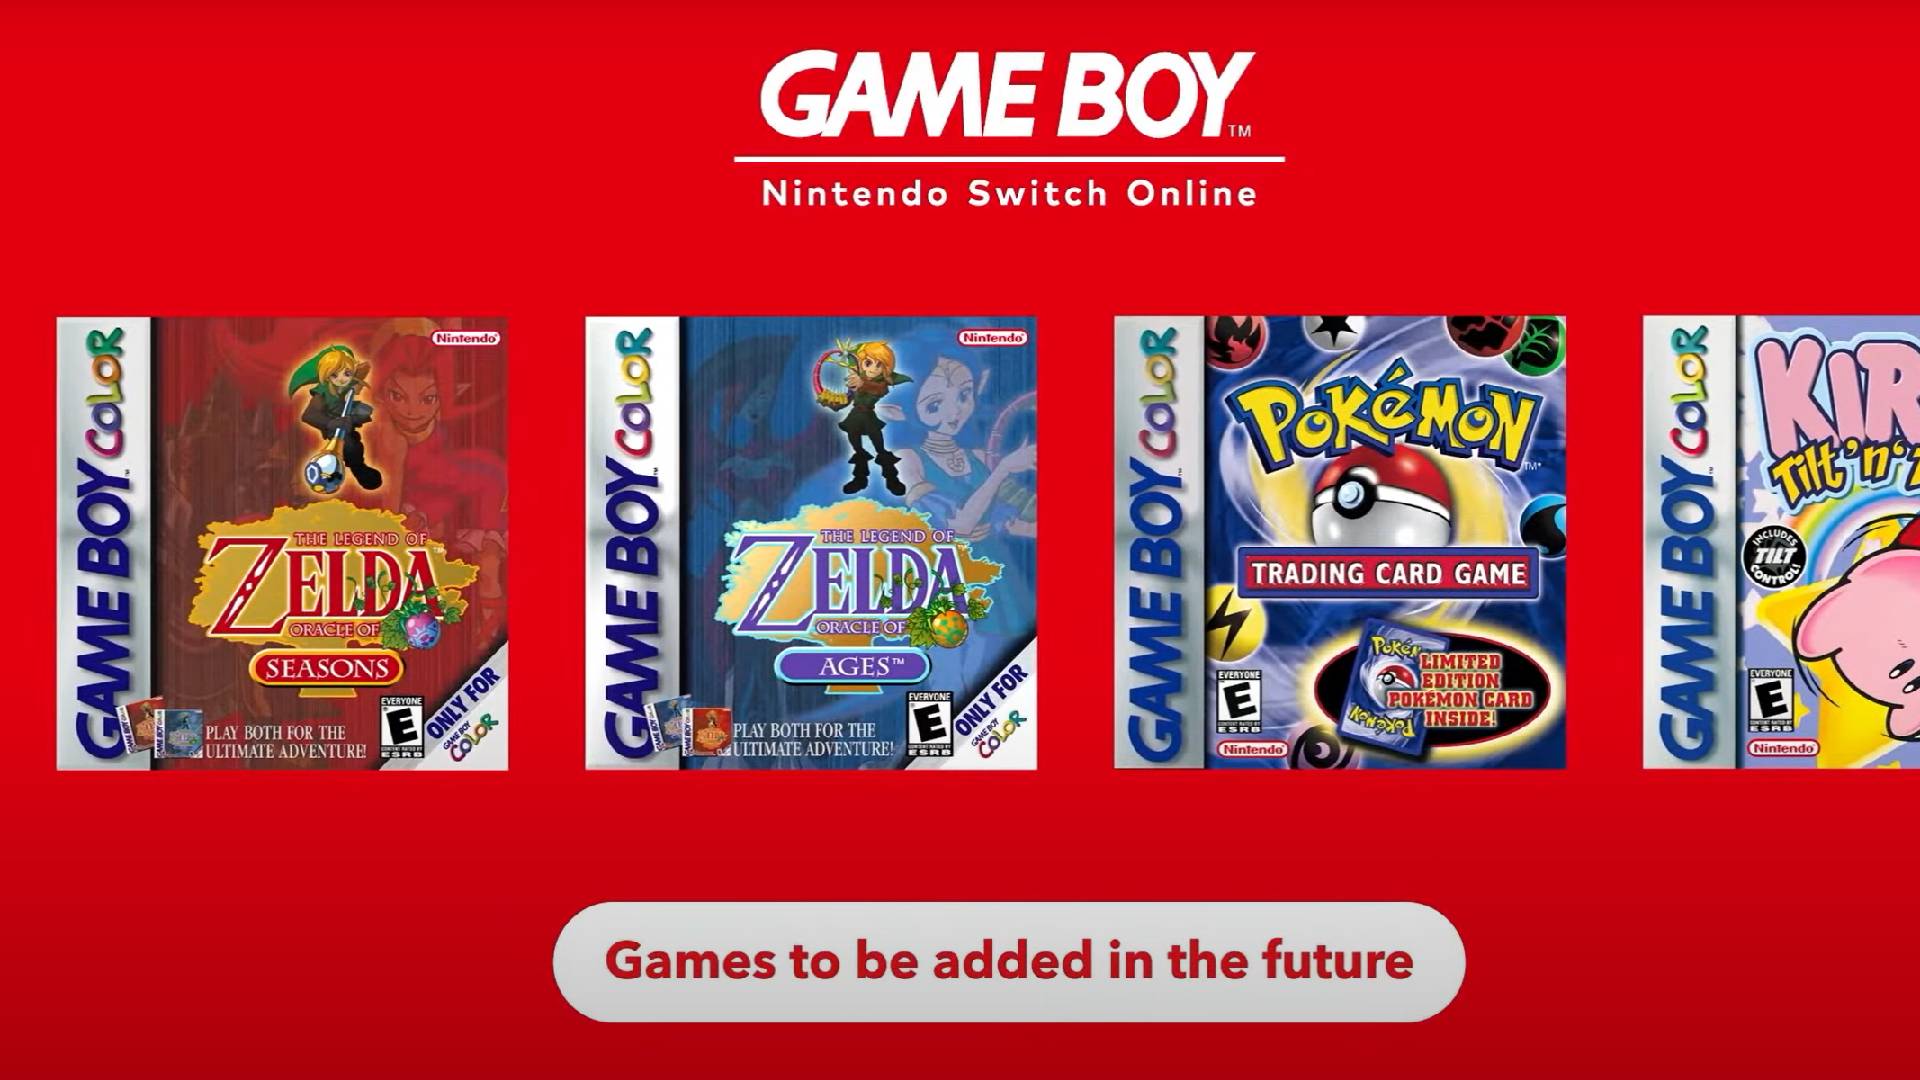 Game Boy and Game Boy Advance are coming to Nintendo Switch! 